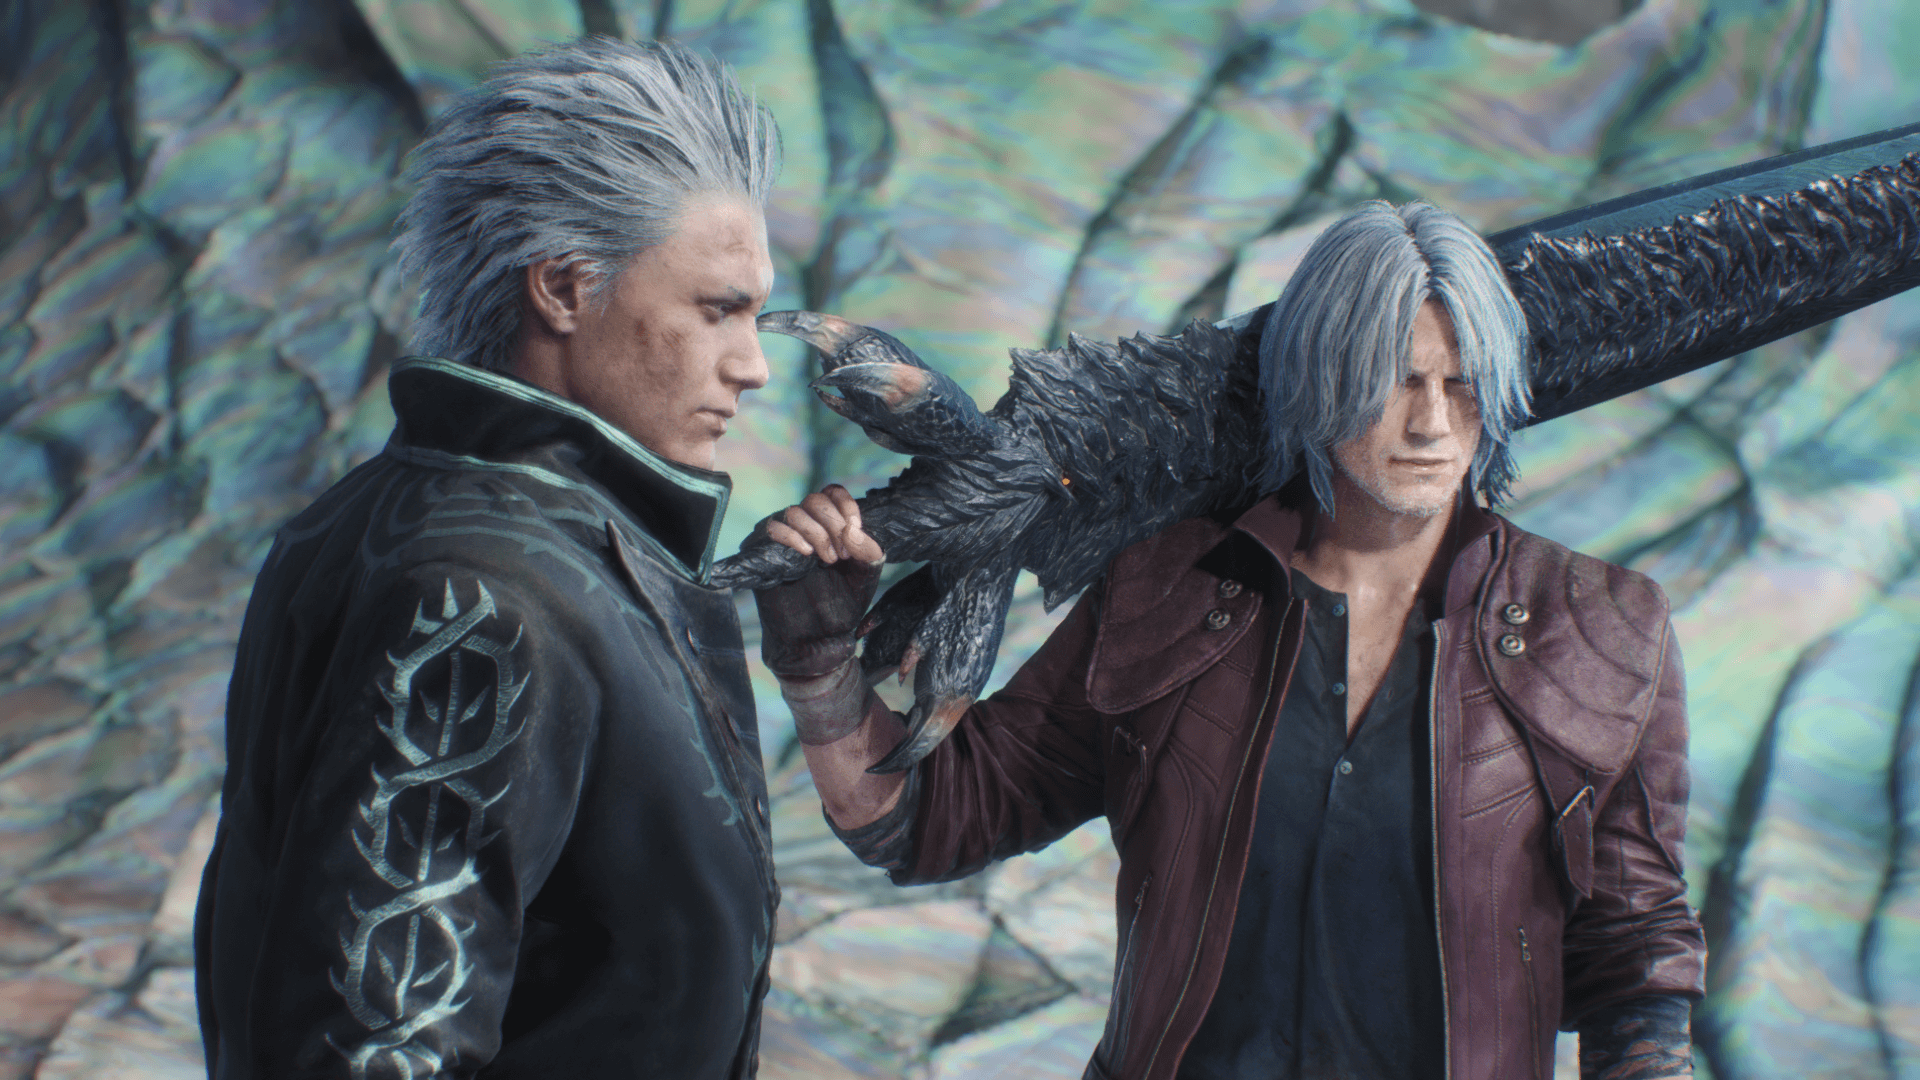 Dante May Cry 5 HD Wallpaper. Background Image